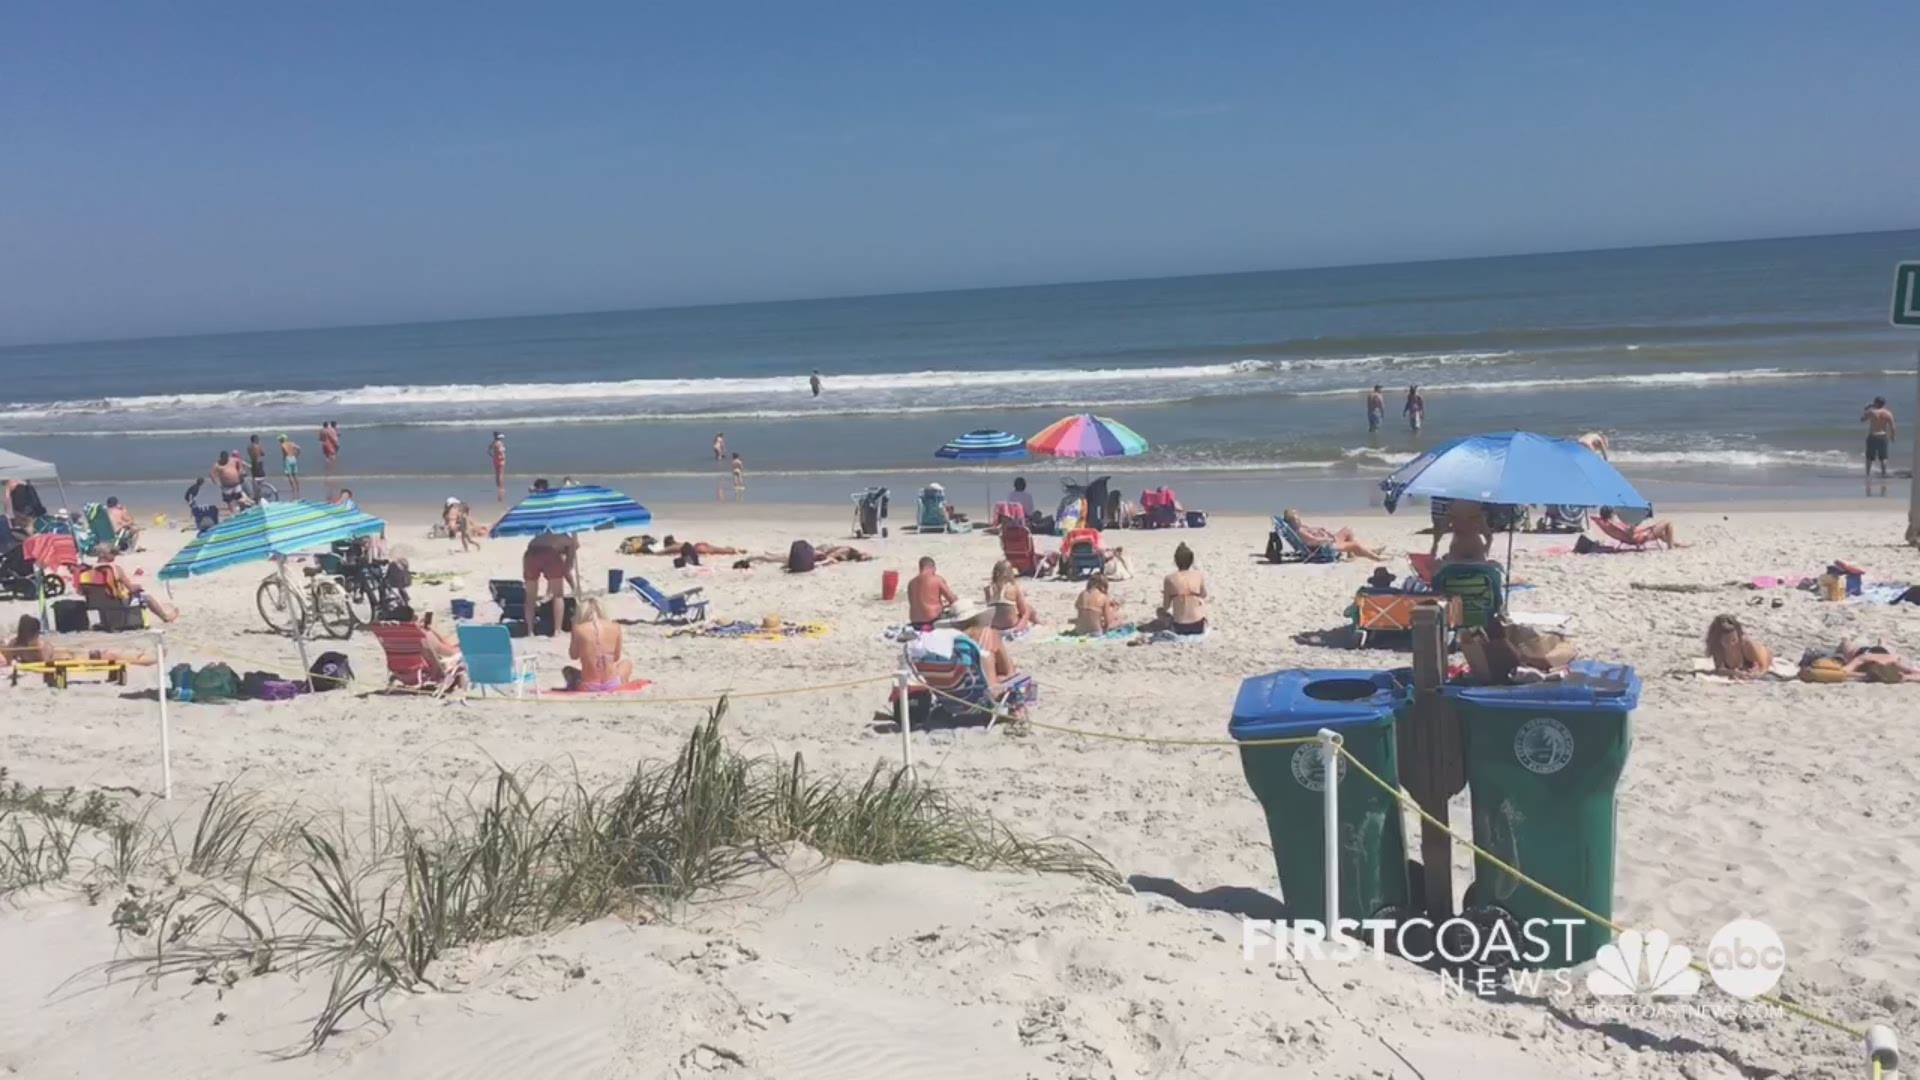 Headlines of cancellations and postponements amid Coronavirus worries didn't keep people away from Jacksonville's beaches on a beautiful, sunny Saturday.